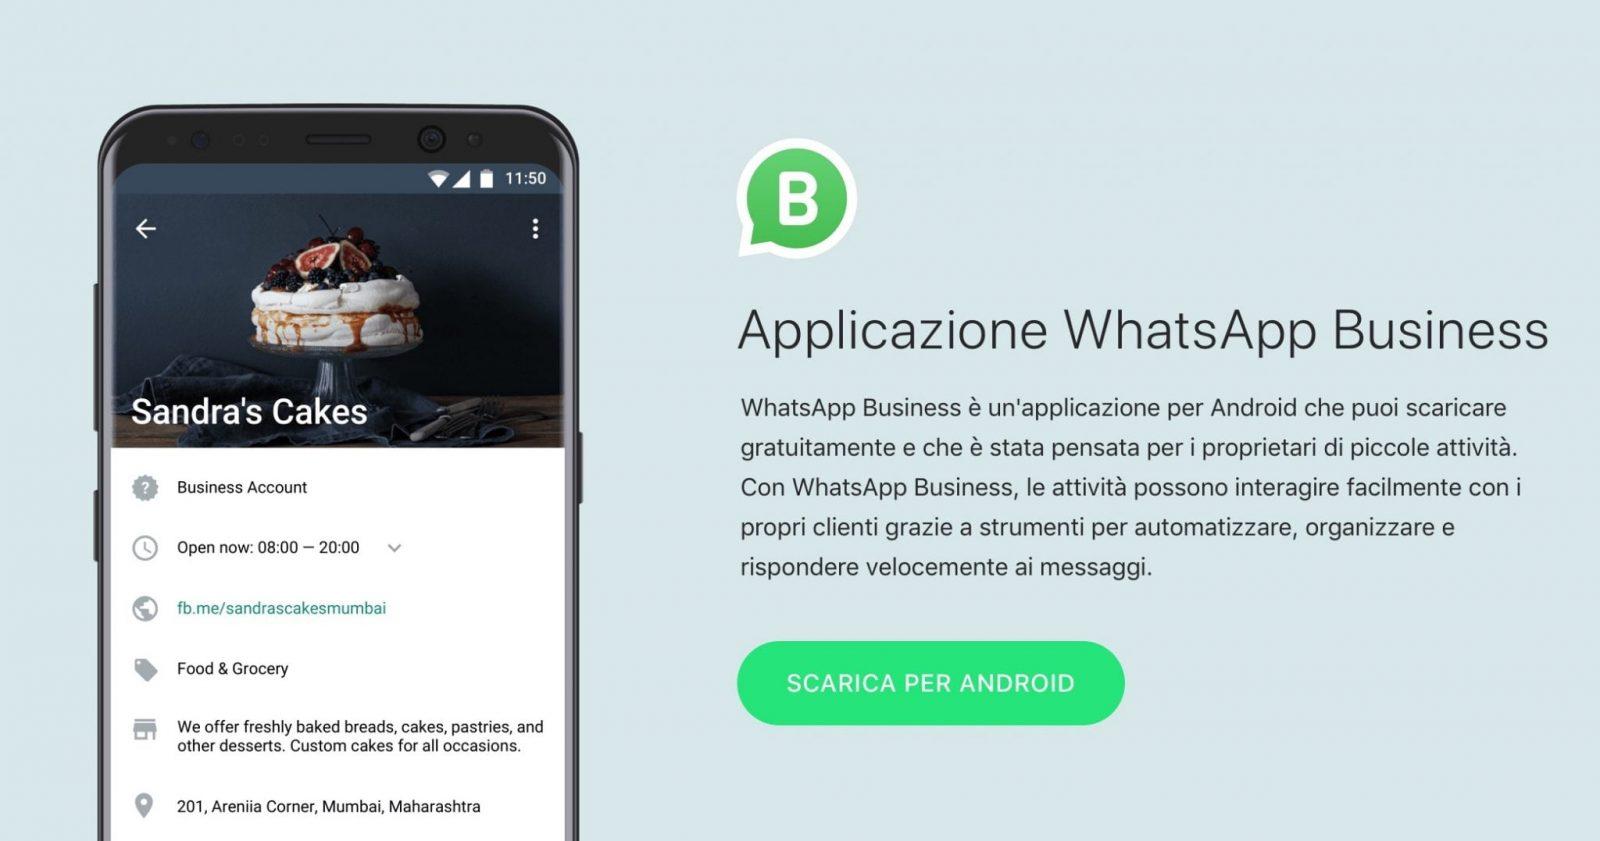 whatsapp business pc download 2020